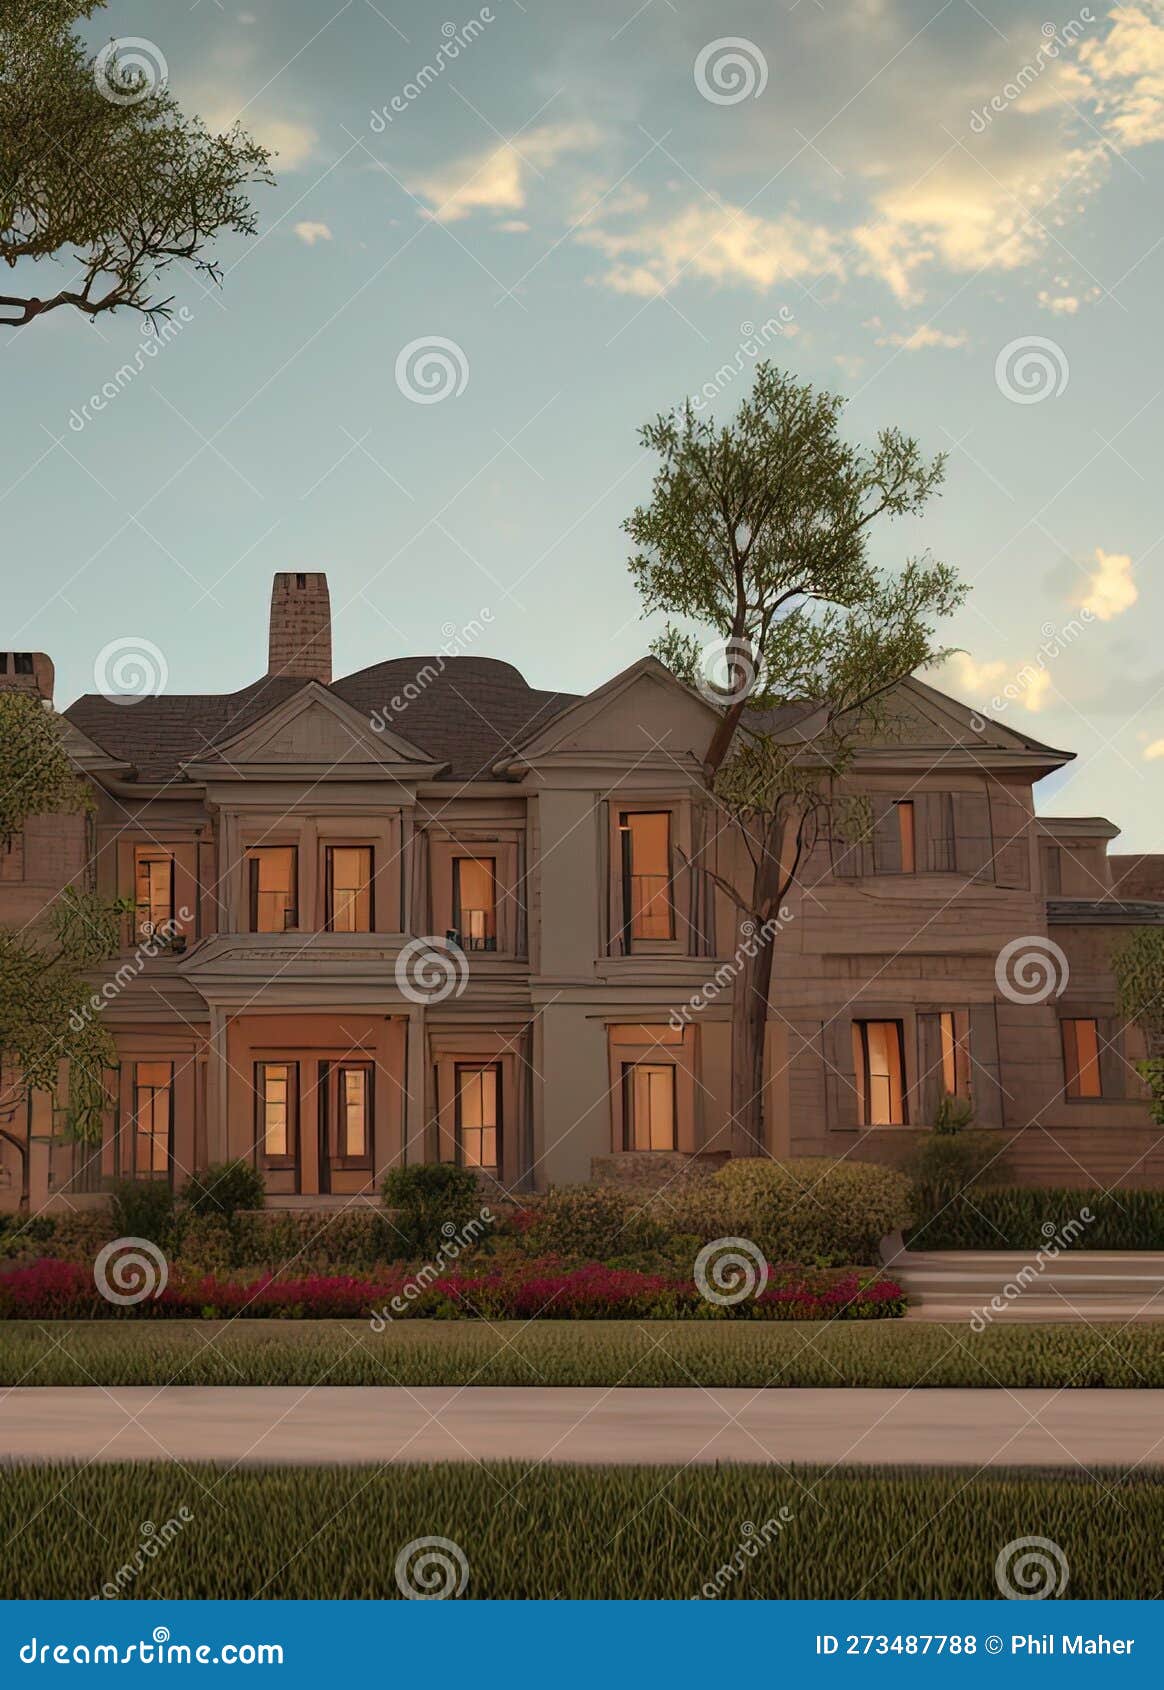 fictional mansion in amarillo, texas, united states.